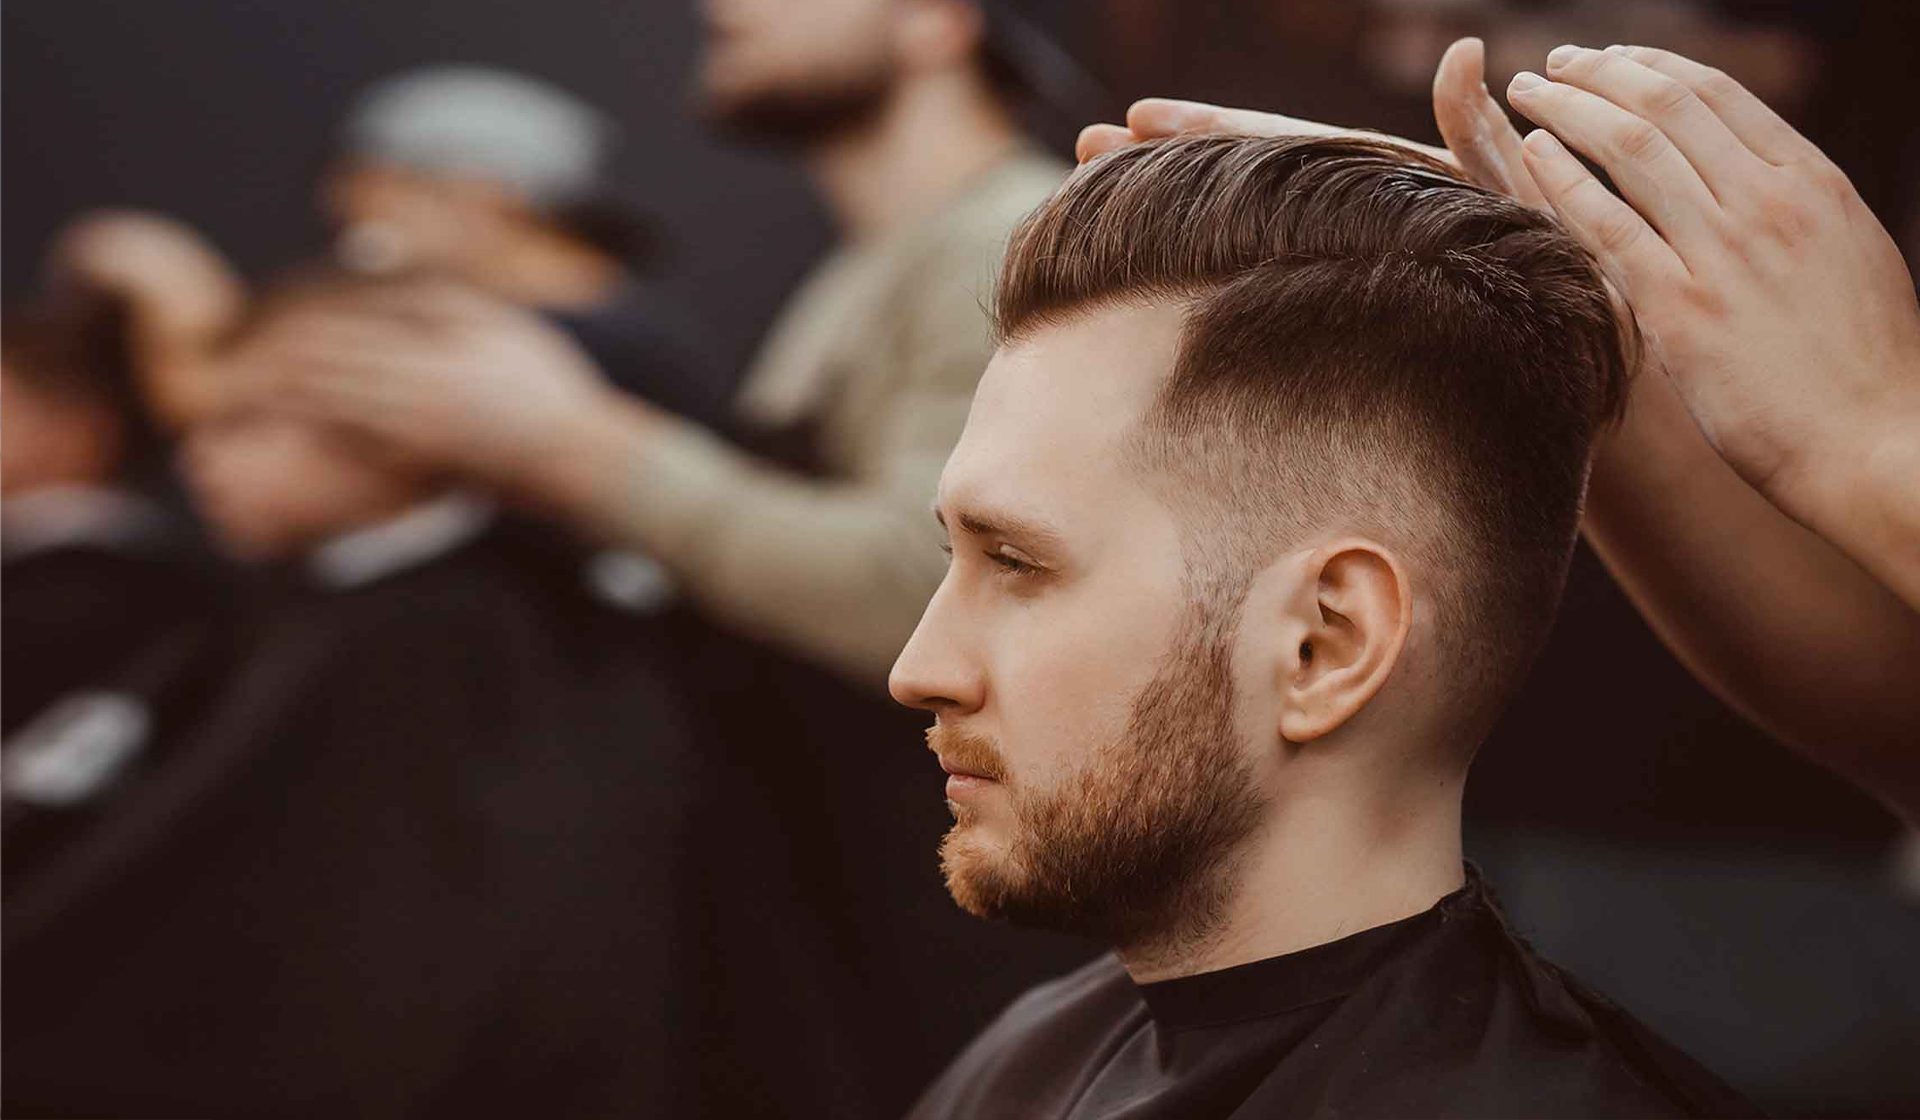 slick back hairstyle men with fade｜TikTok Search